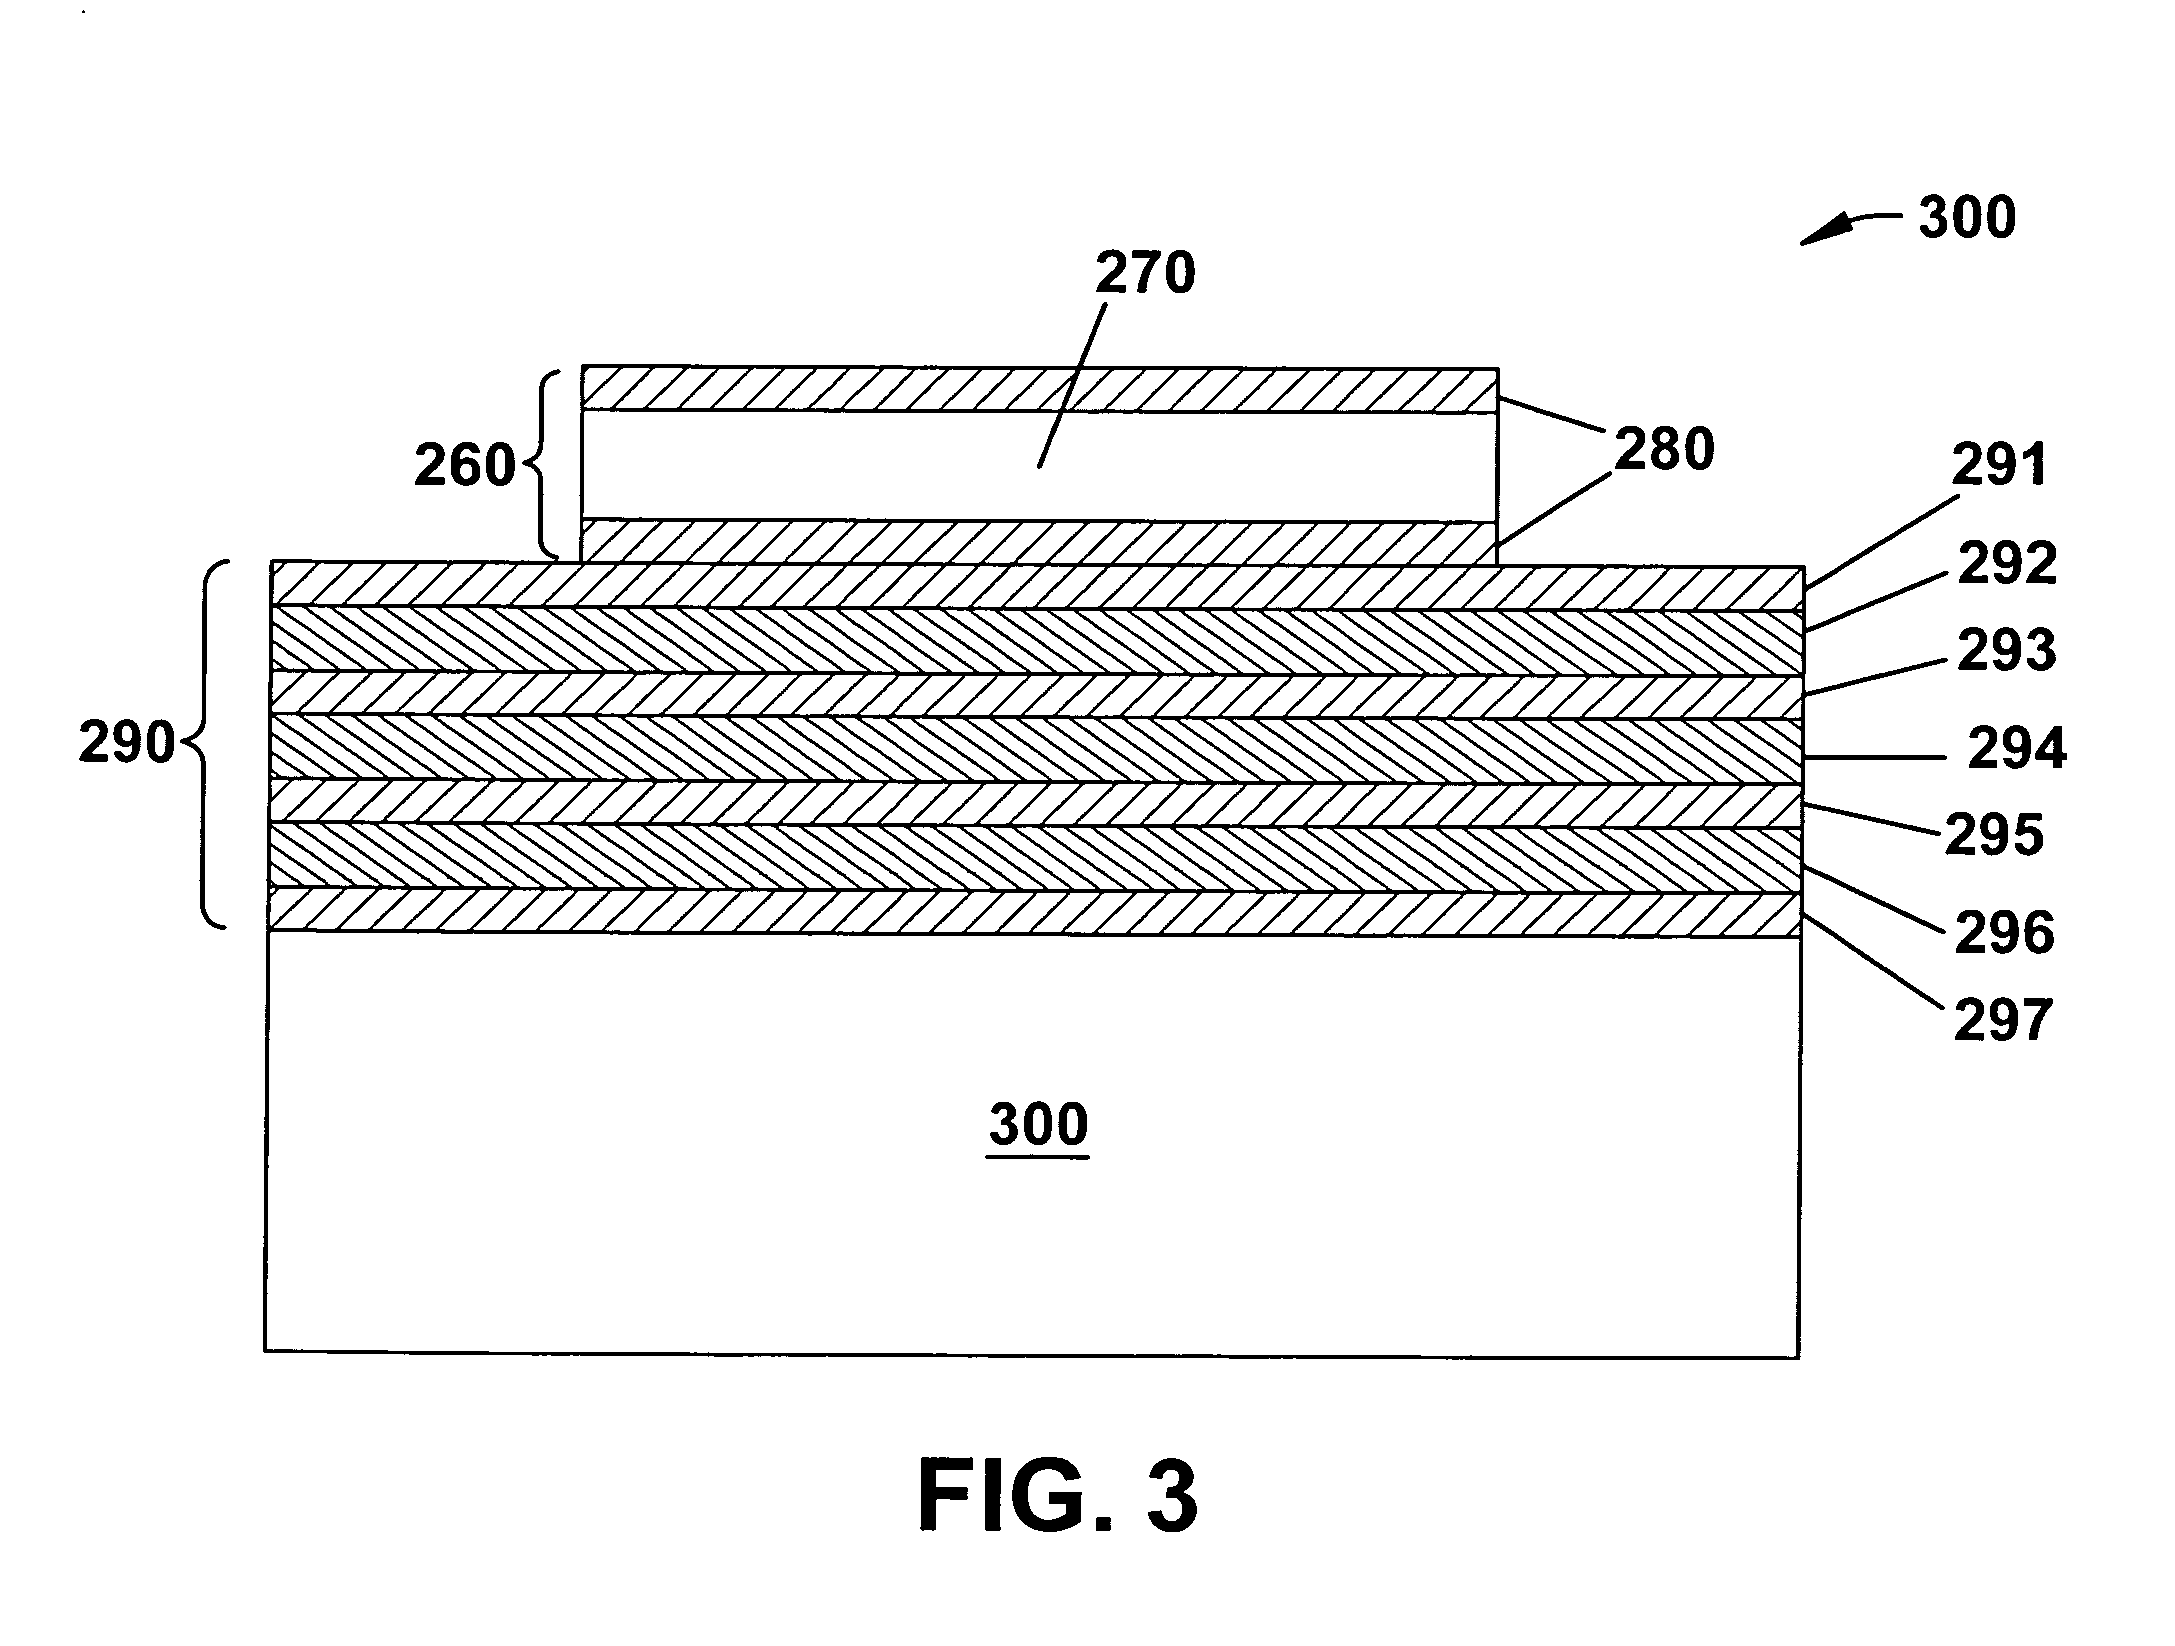 Piezoelectric resonator with an efficient all-dielectric Bragg reflector